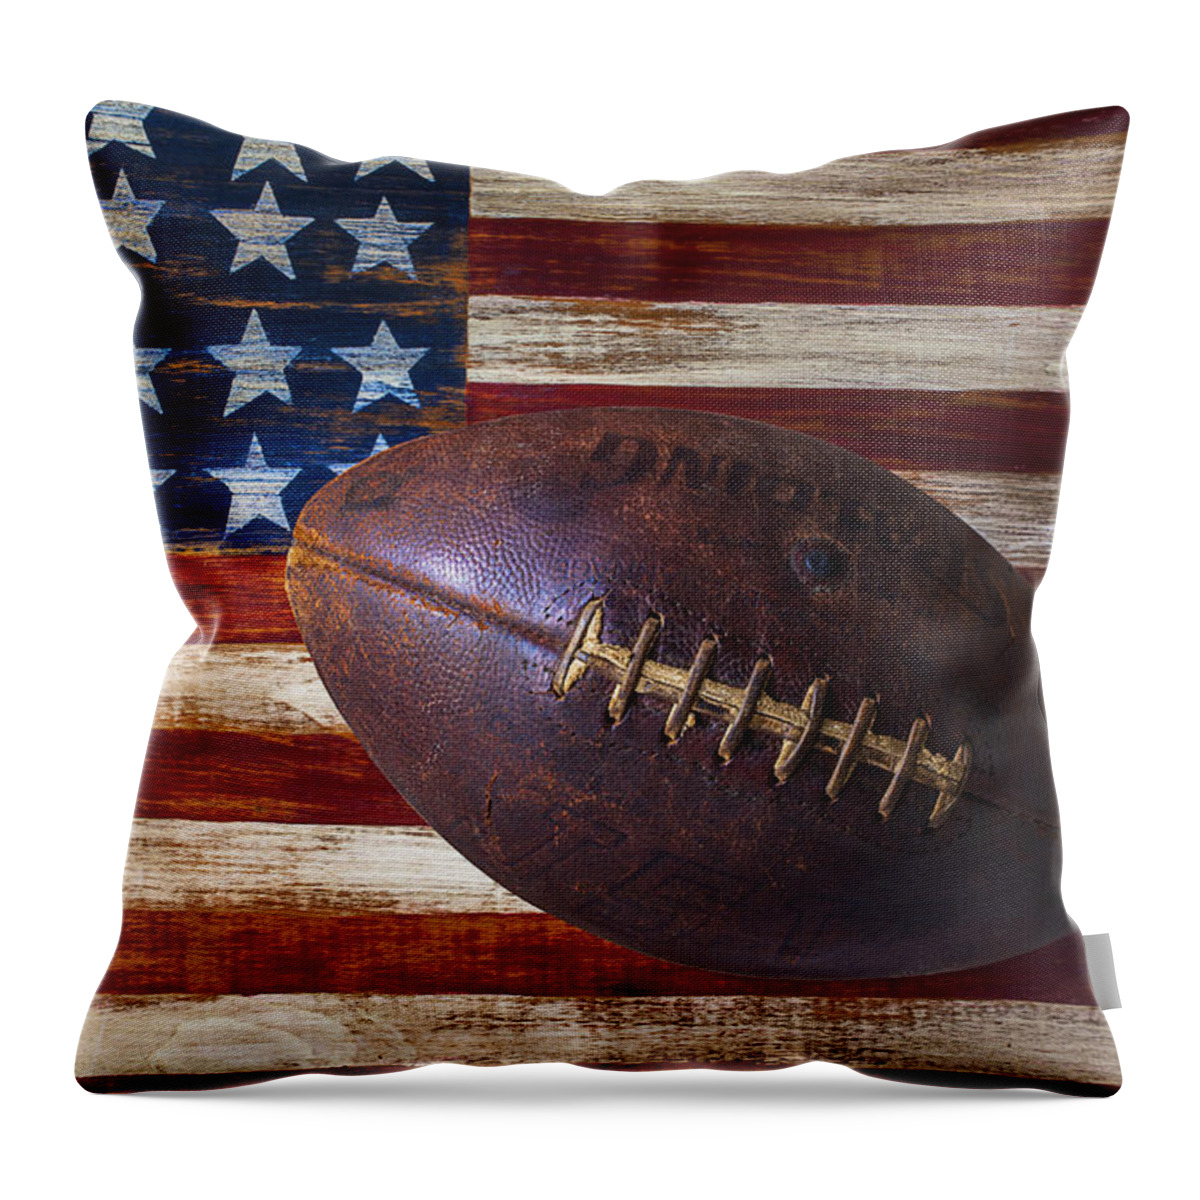 Football Throw Pillow featuring the photograph Old Football On American Flag by Garry Gay